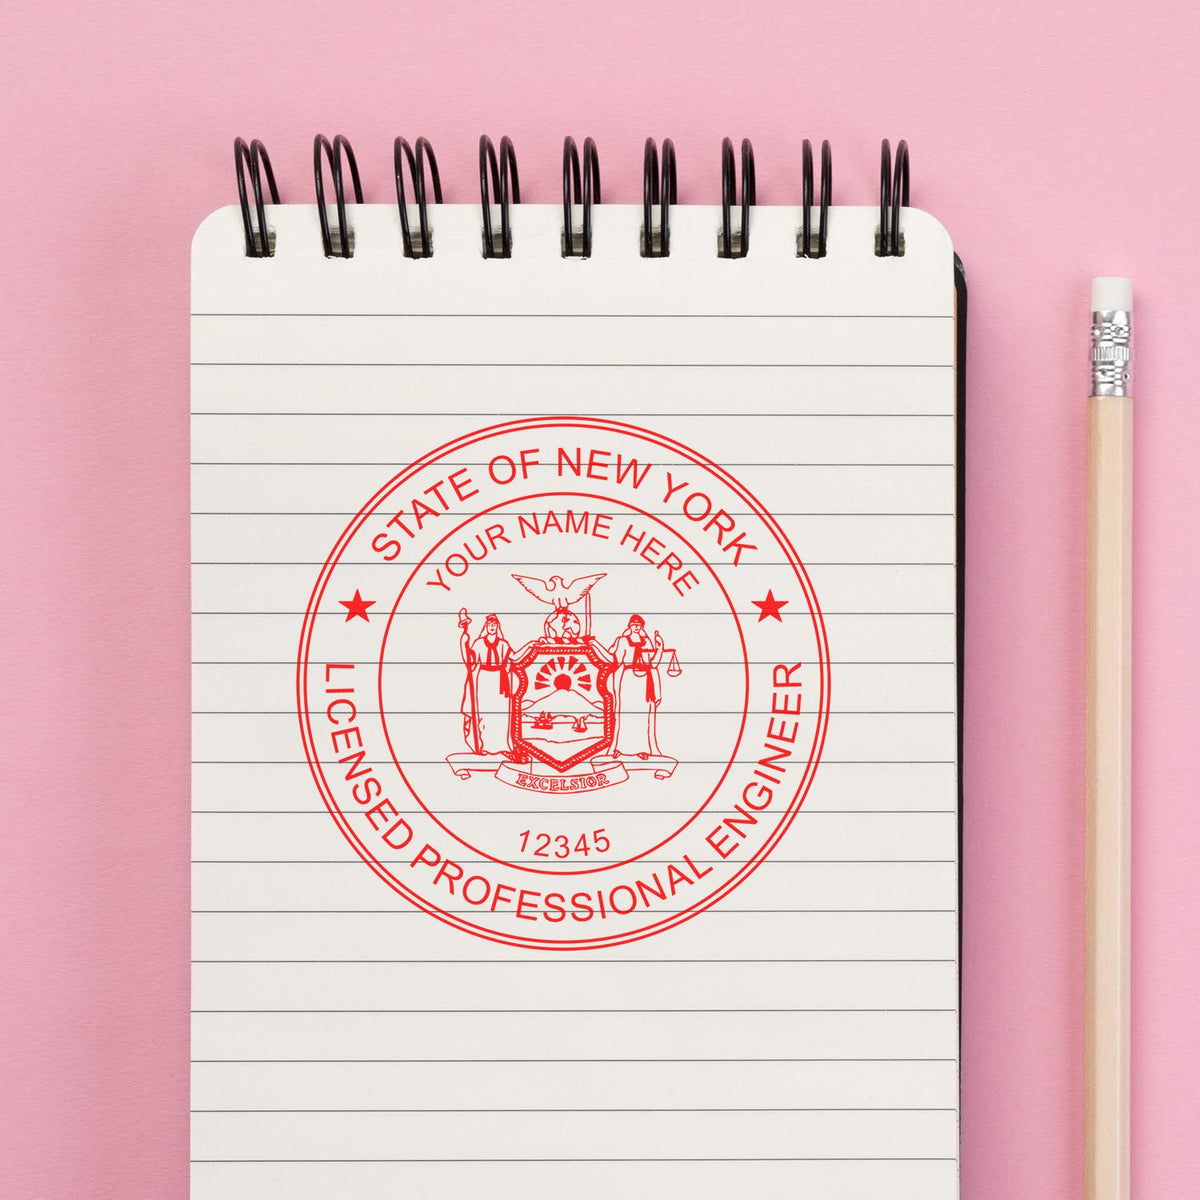 A lifestyle photo showing a stamped image of the New York Professional Engineer Seal Stamp on a piece of paper